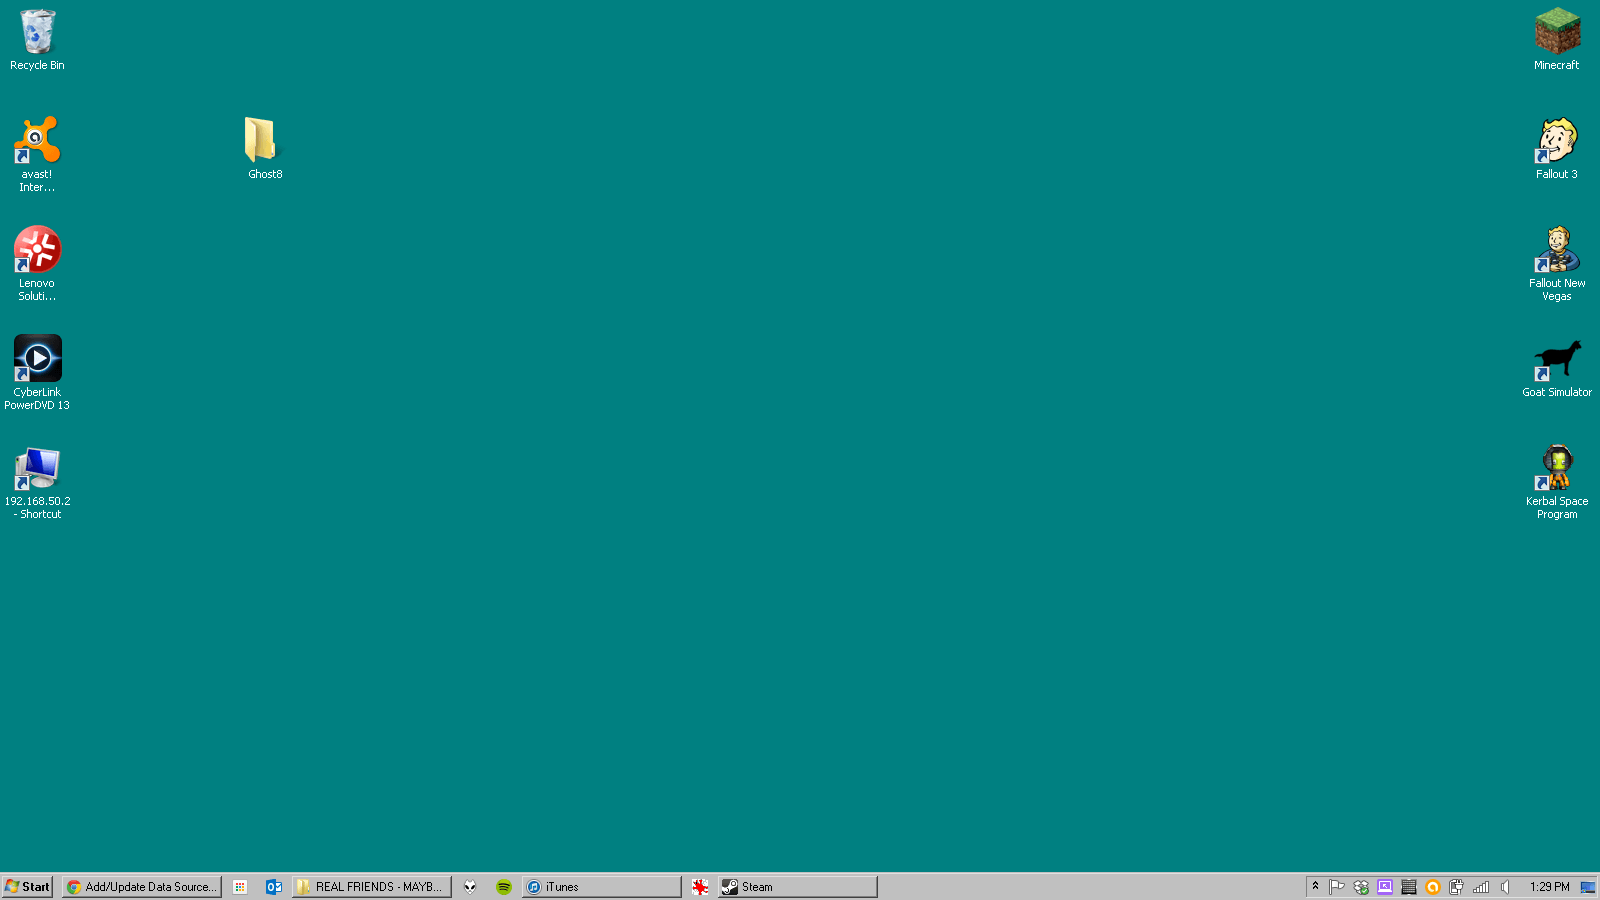 A desktop with several icons on it - Windows 95